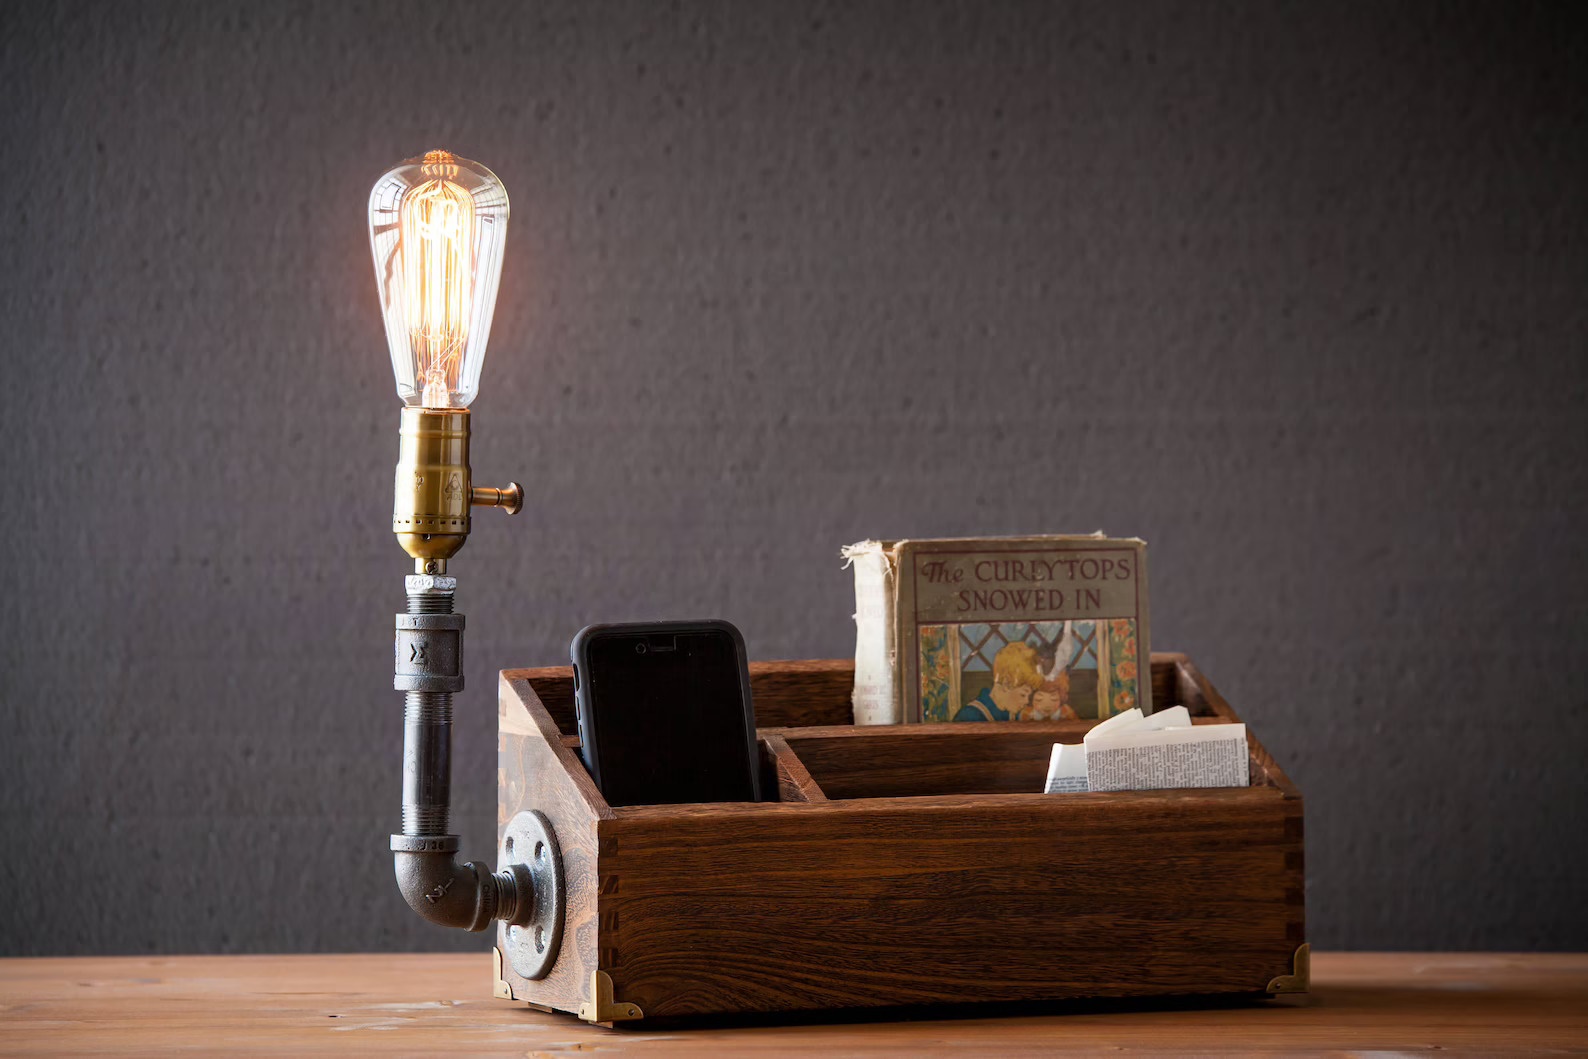 16 Industrial Table Lamp Designs That Will Add Character to Your Decor